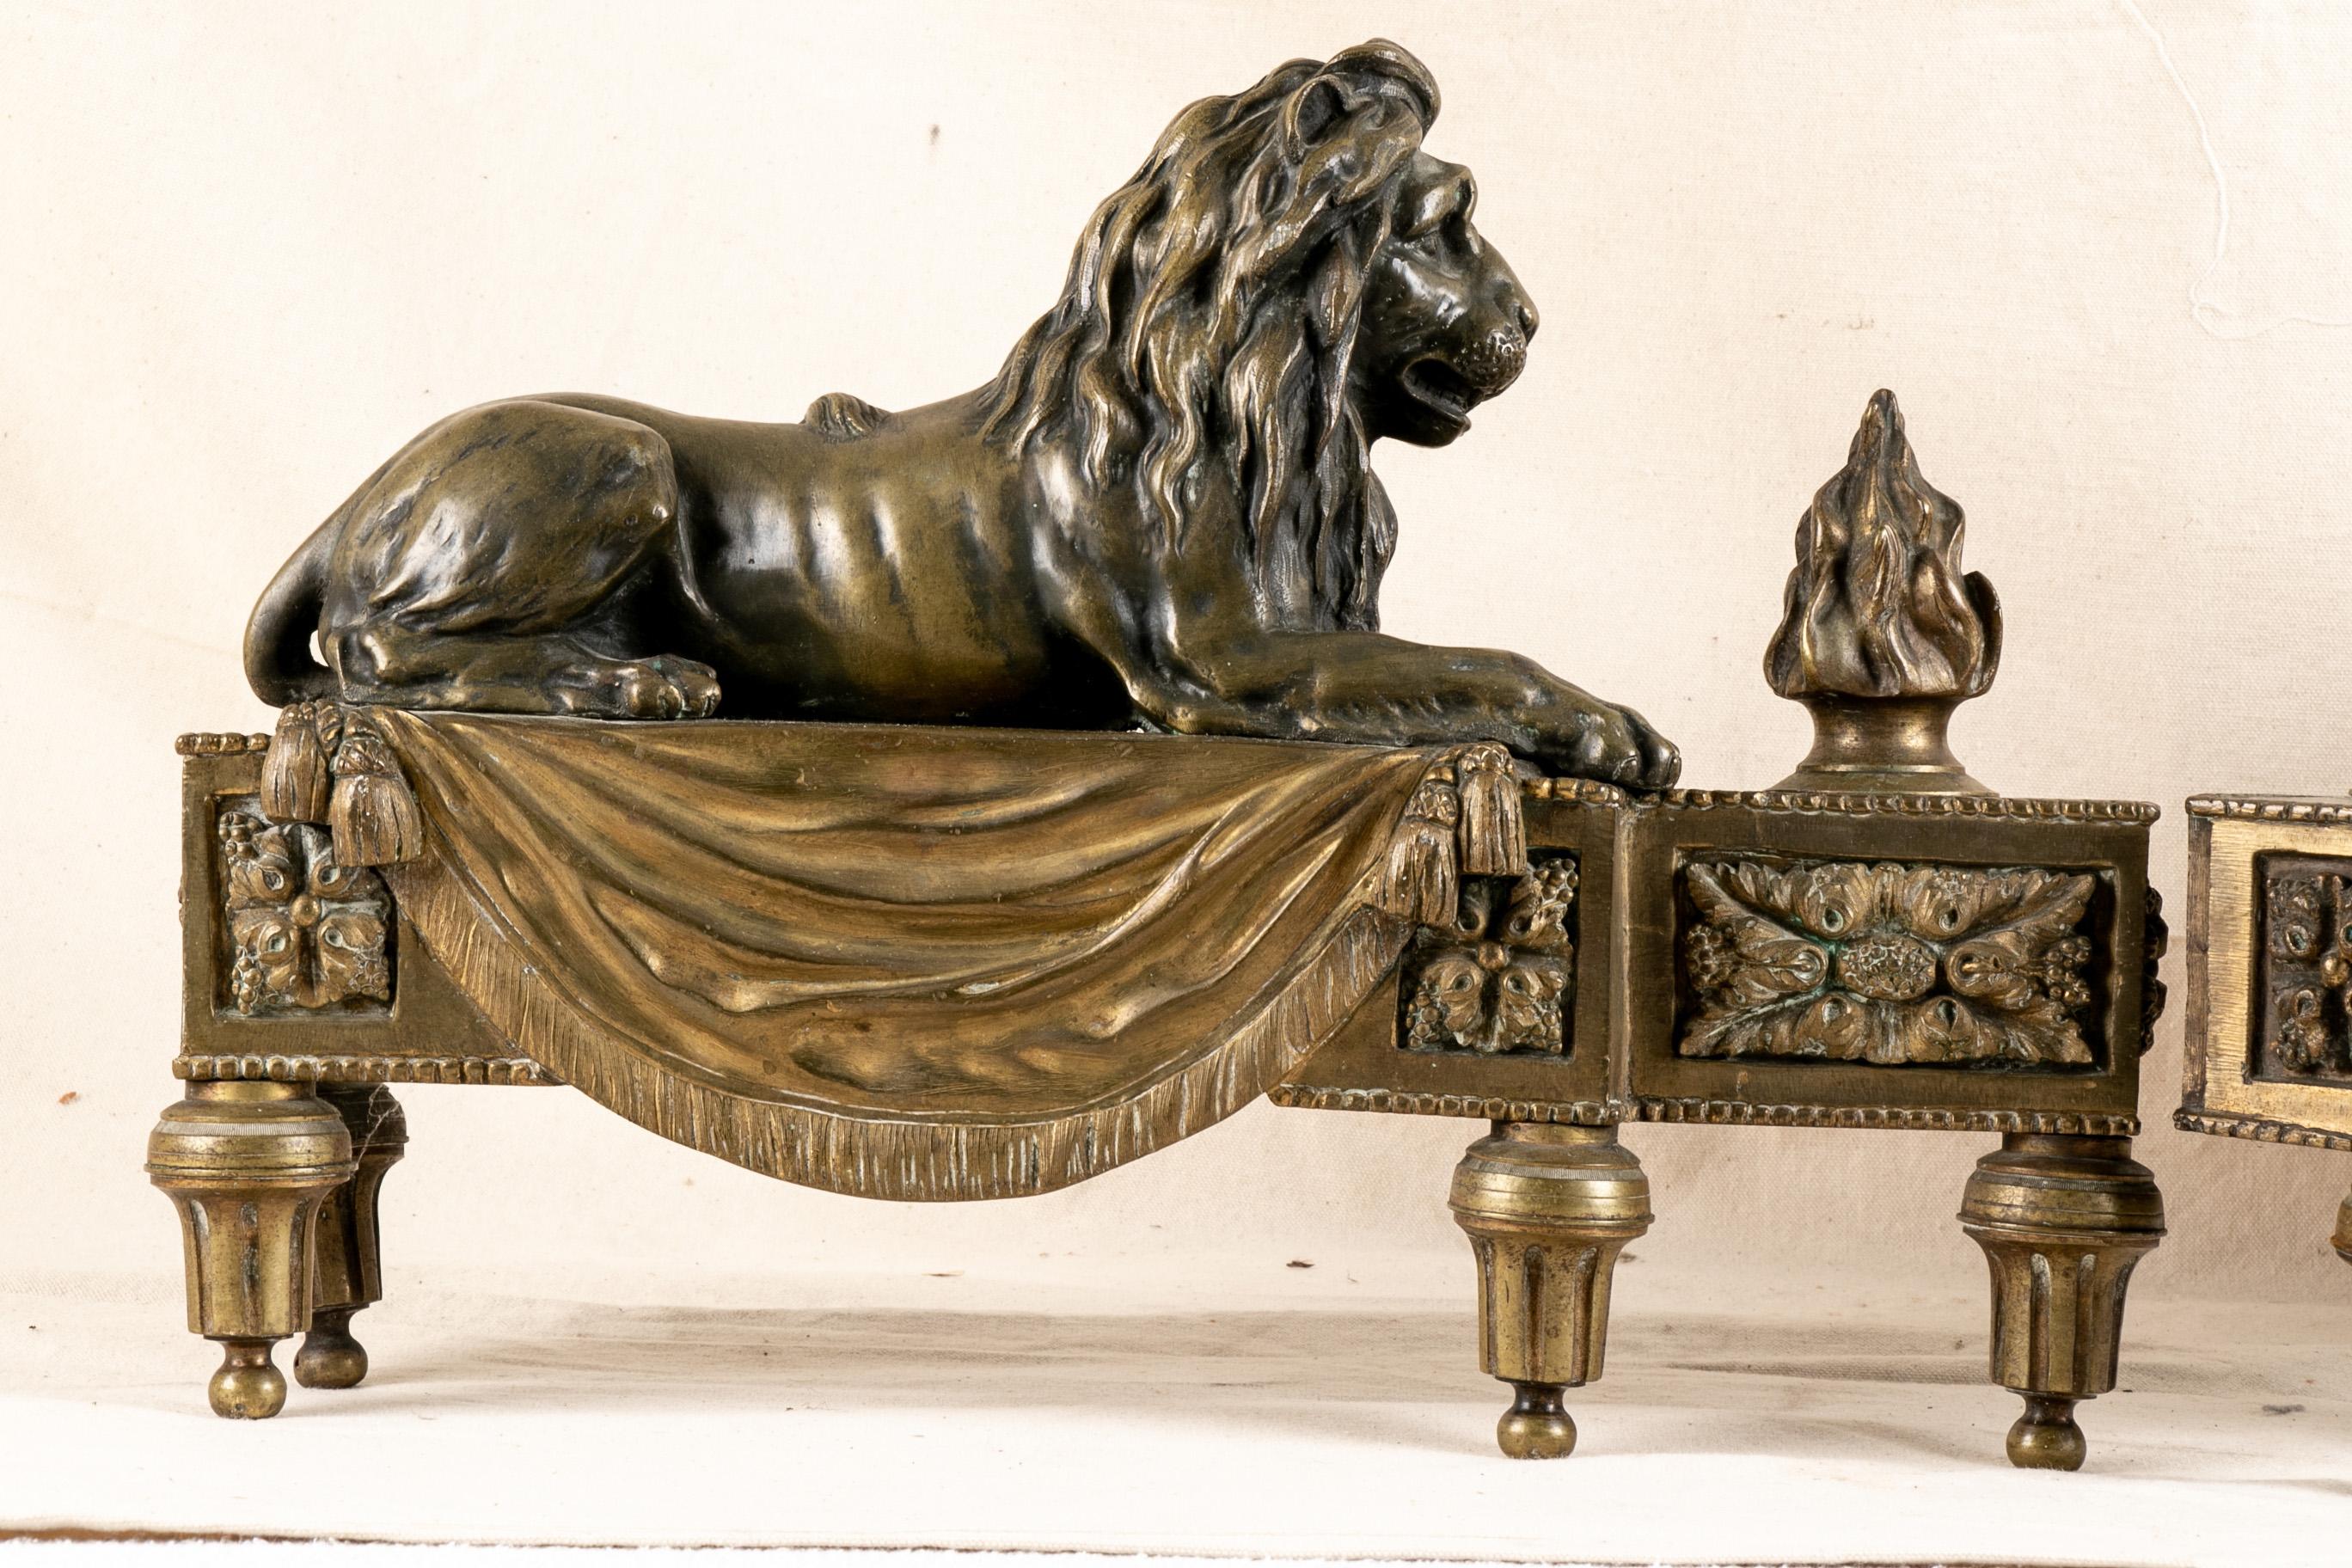 Antique bronze lion form chenets, recumbent lions on drapery covered plinths with tassels. Relief panels with leaf and berry motifs and three-dimensional flame motifs on the front ends. Raised on fluted peg form legs. Hollow backs. 

Condition: